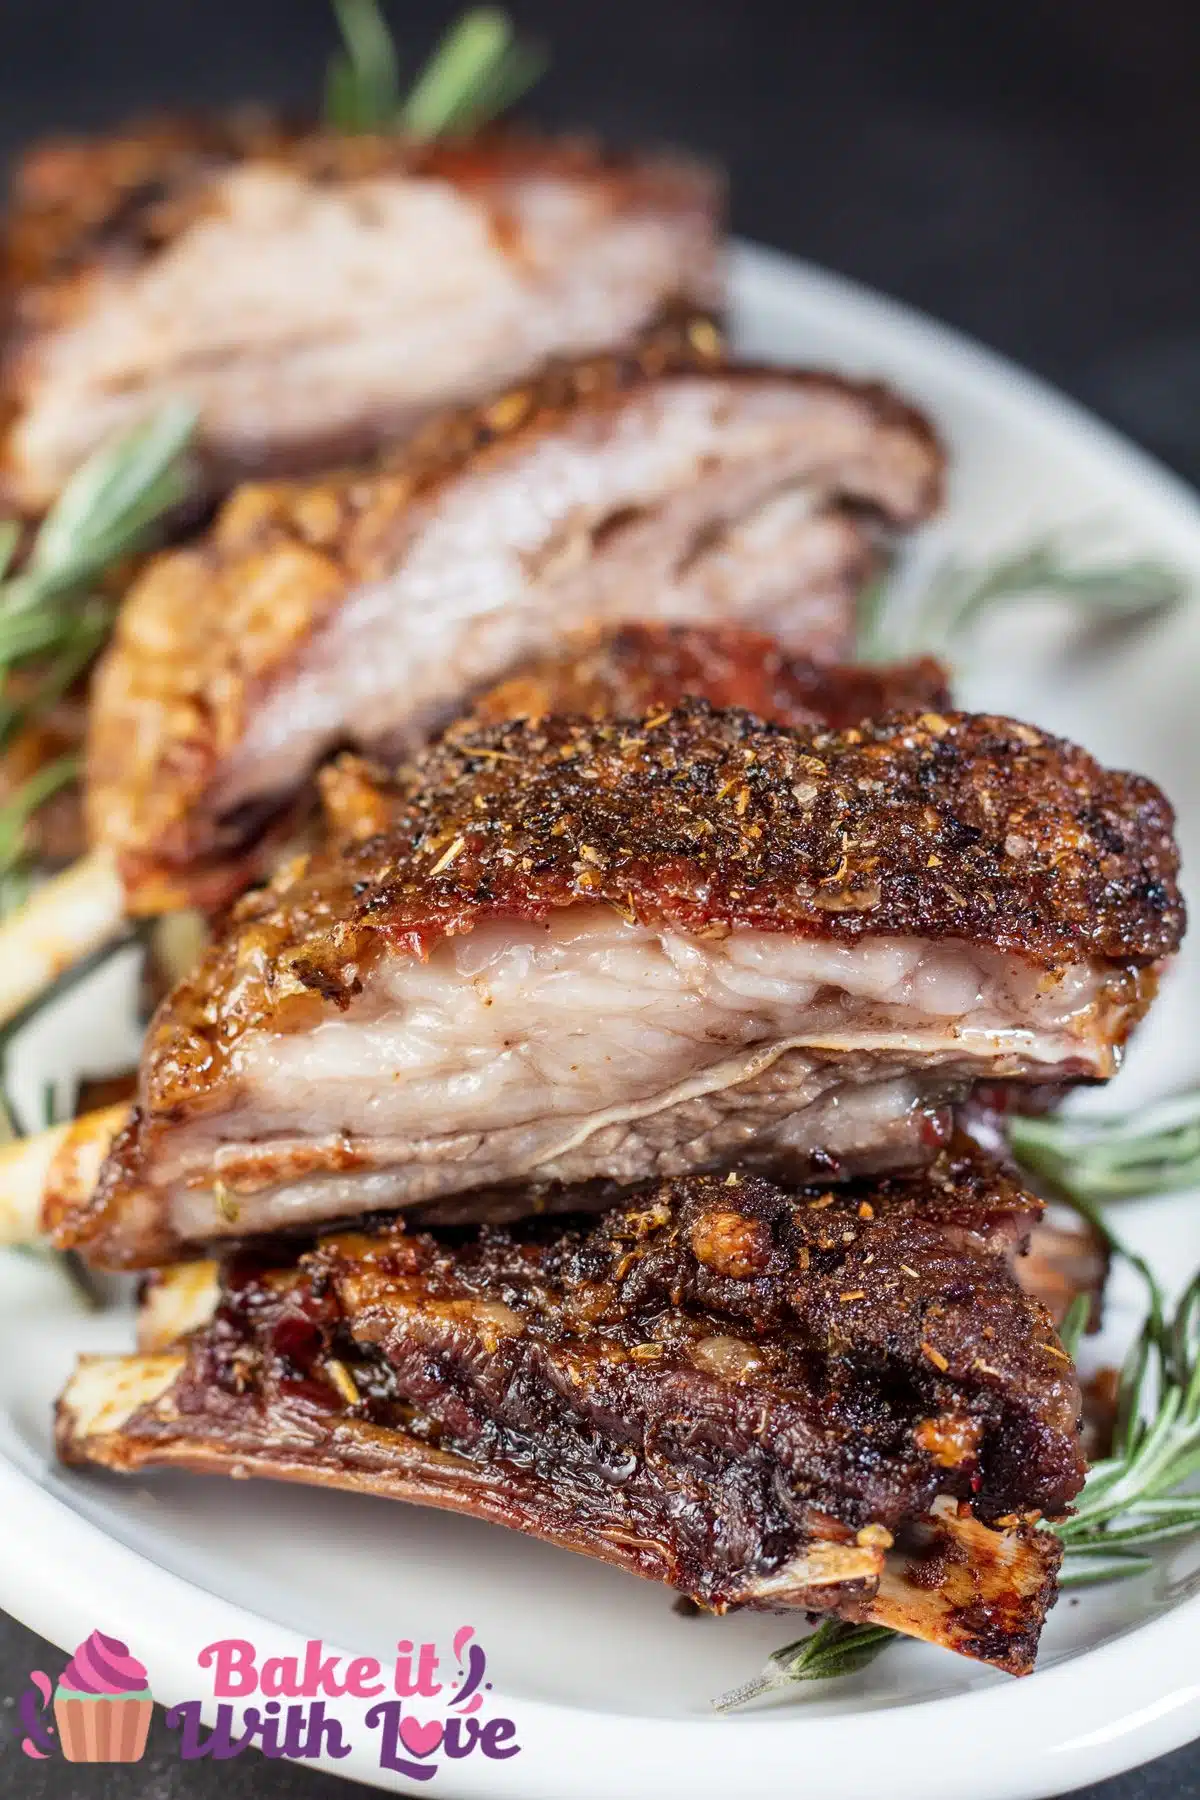 Tall image showing lamb breast ribs on a serving plate.